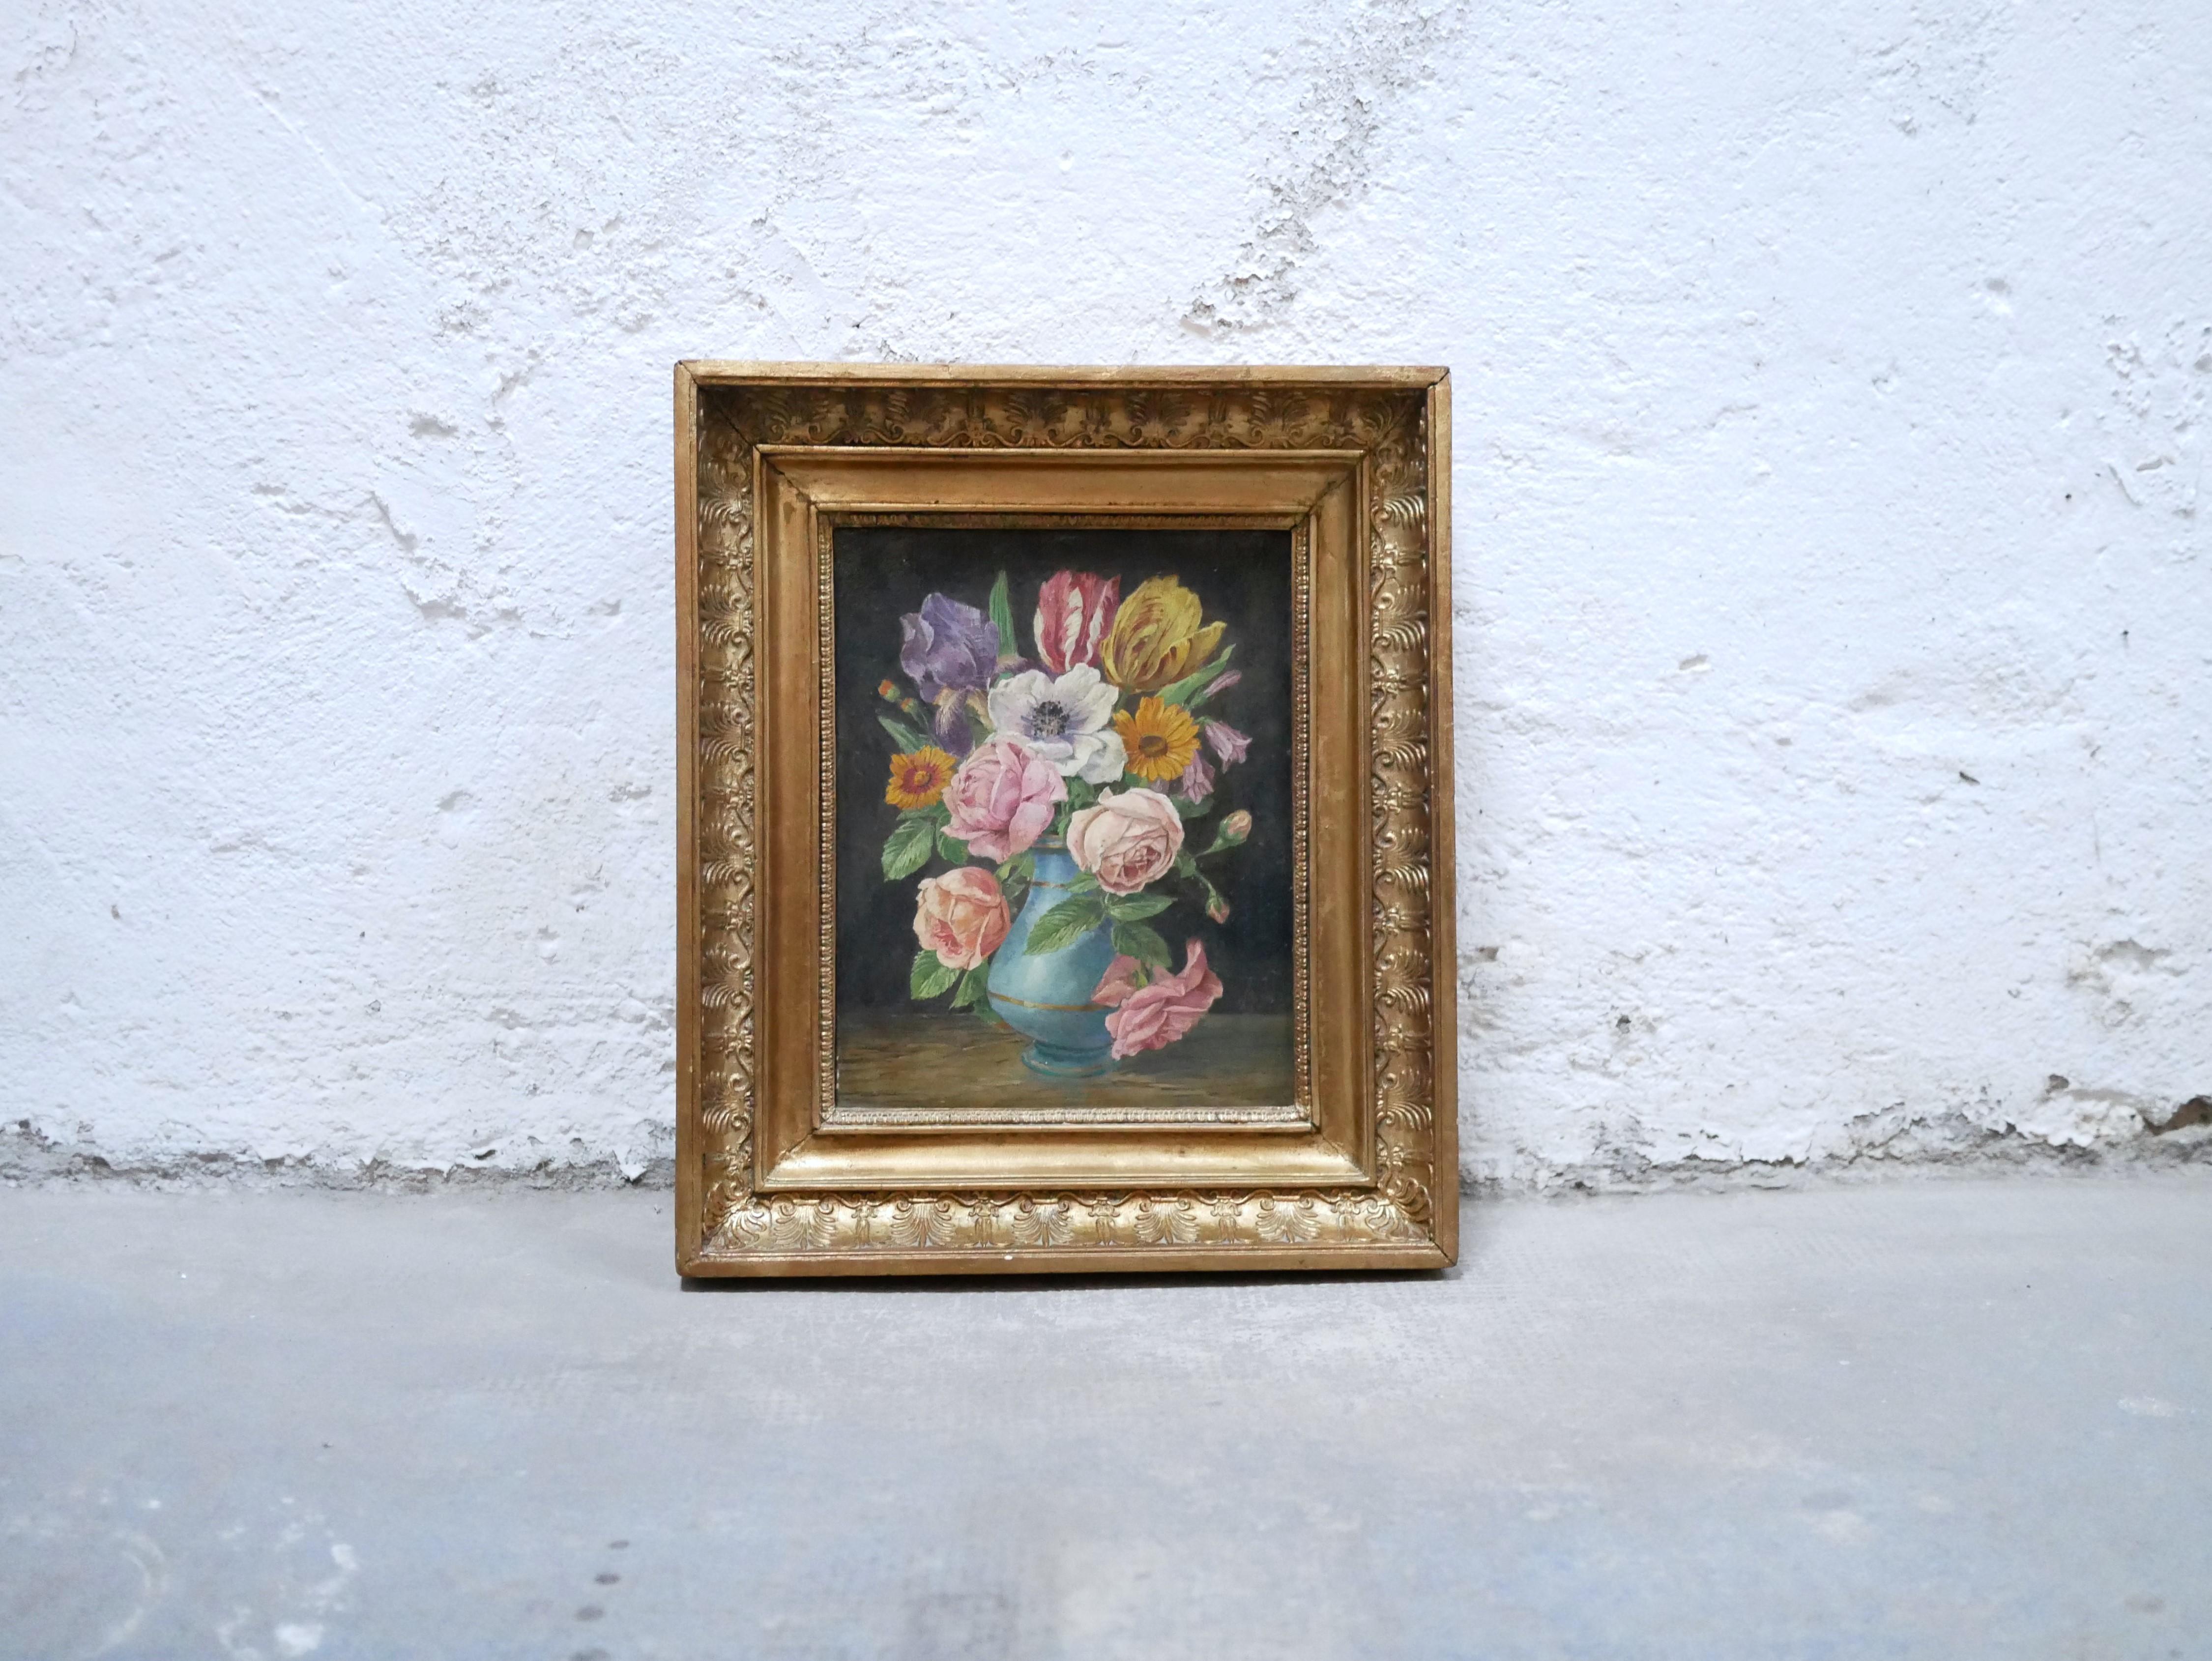 Oil on canvas, circa 1930.

Poetic and aesthetic, this painting does not lack beauty and delicacy. It will be perfect in a current decoration, alone or combined with other paintings.
The gold frame is beautiful and matches perfectly with the bouquet